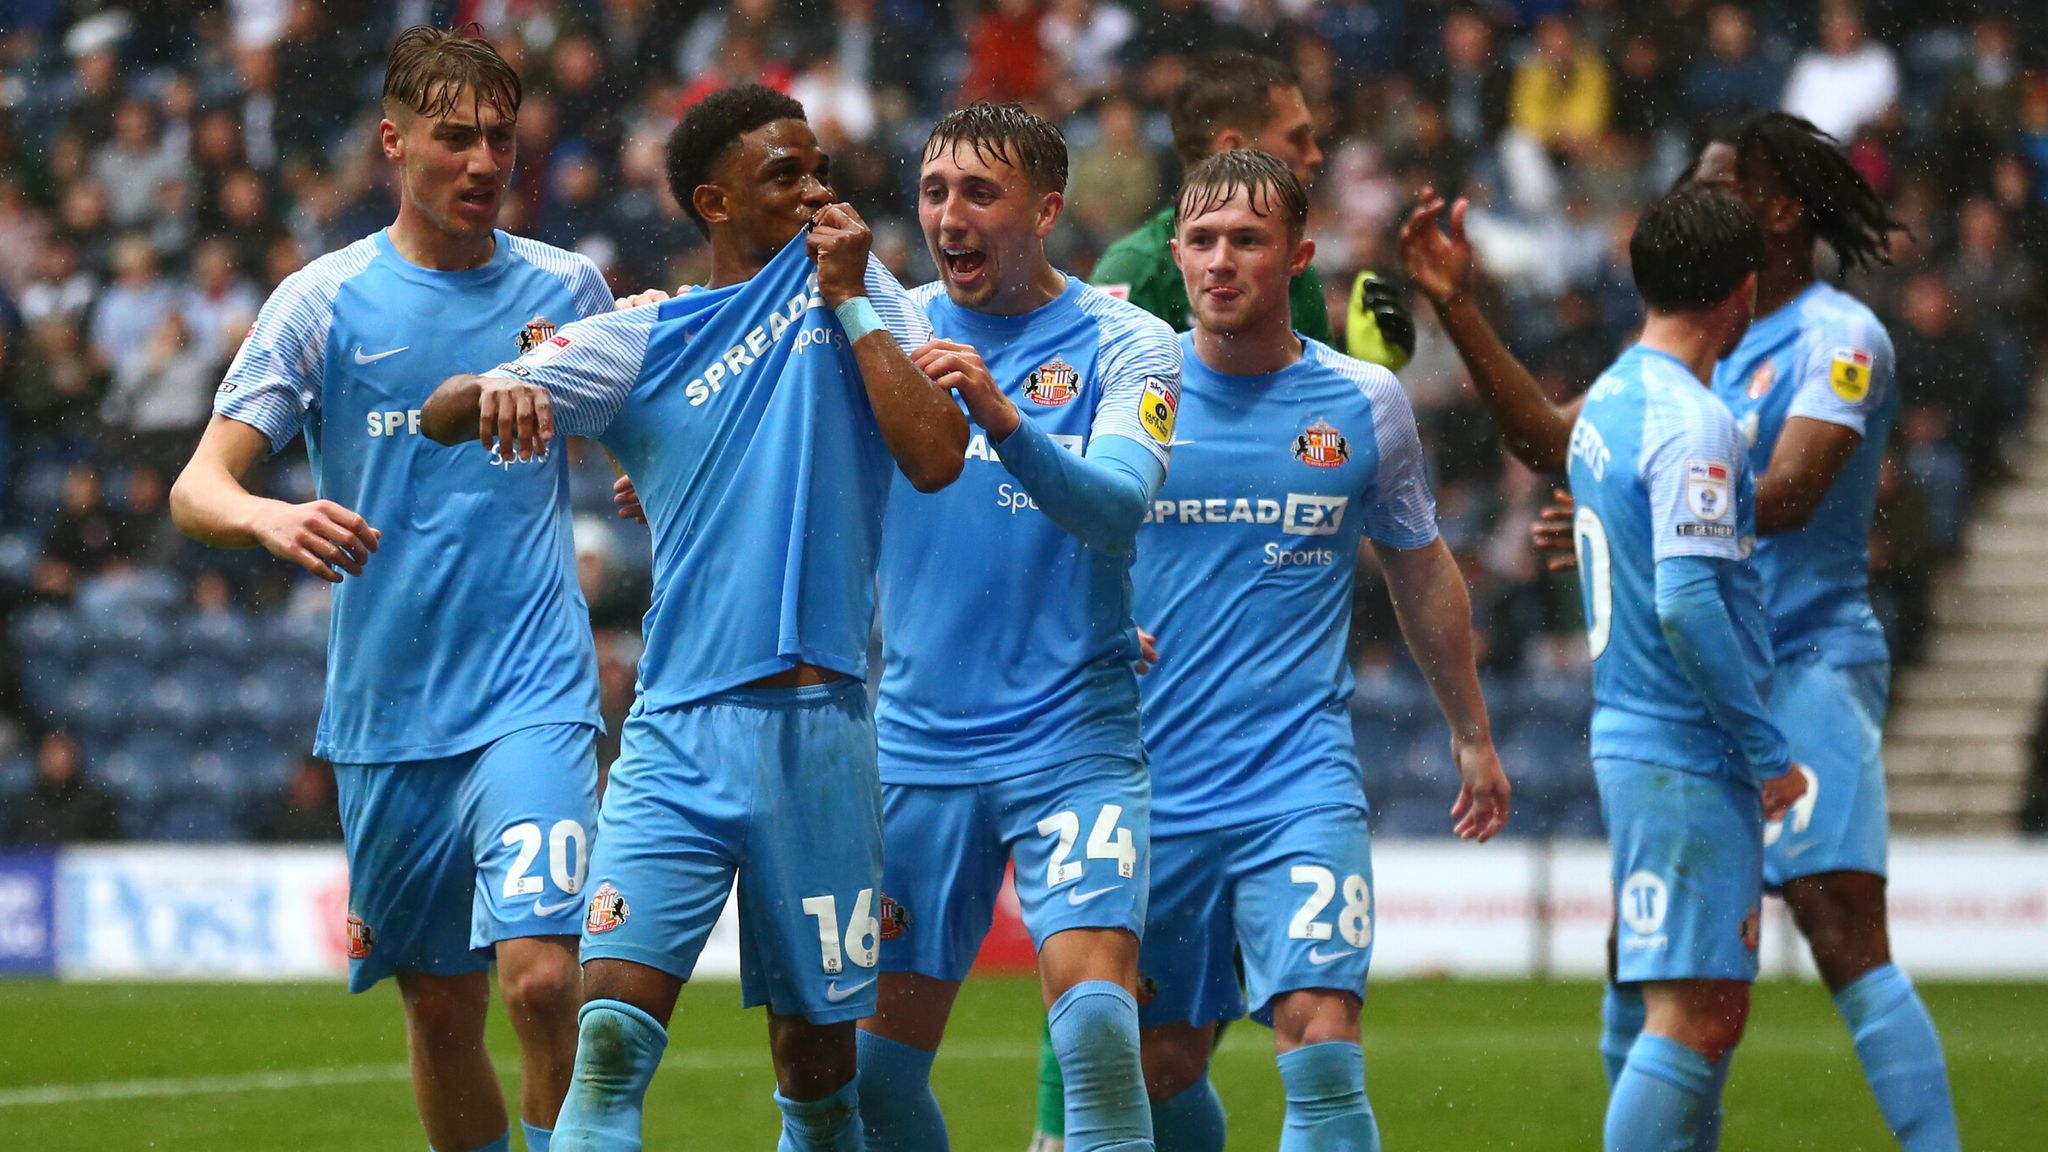 REPORT: Cardiff City 3-2 Coventry City - News - Coventry City